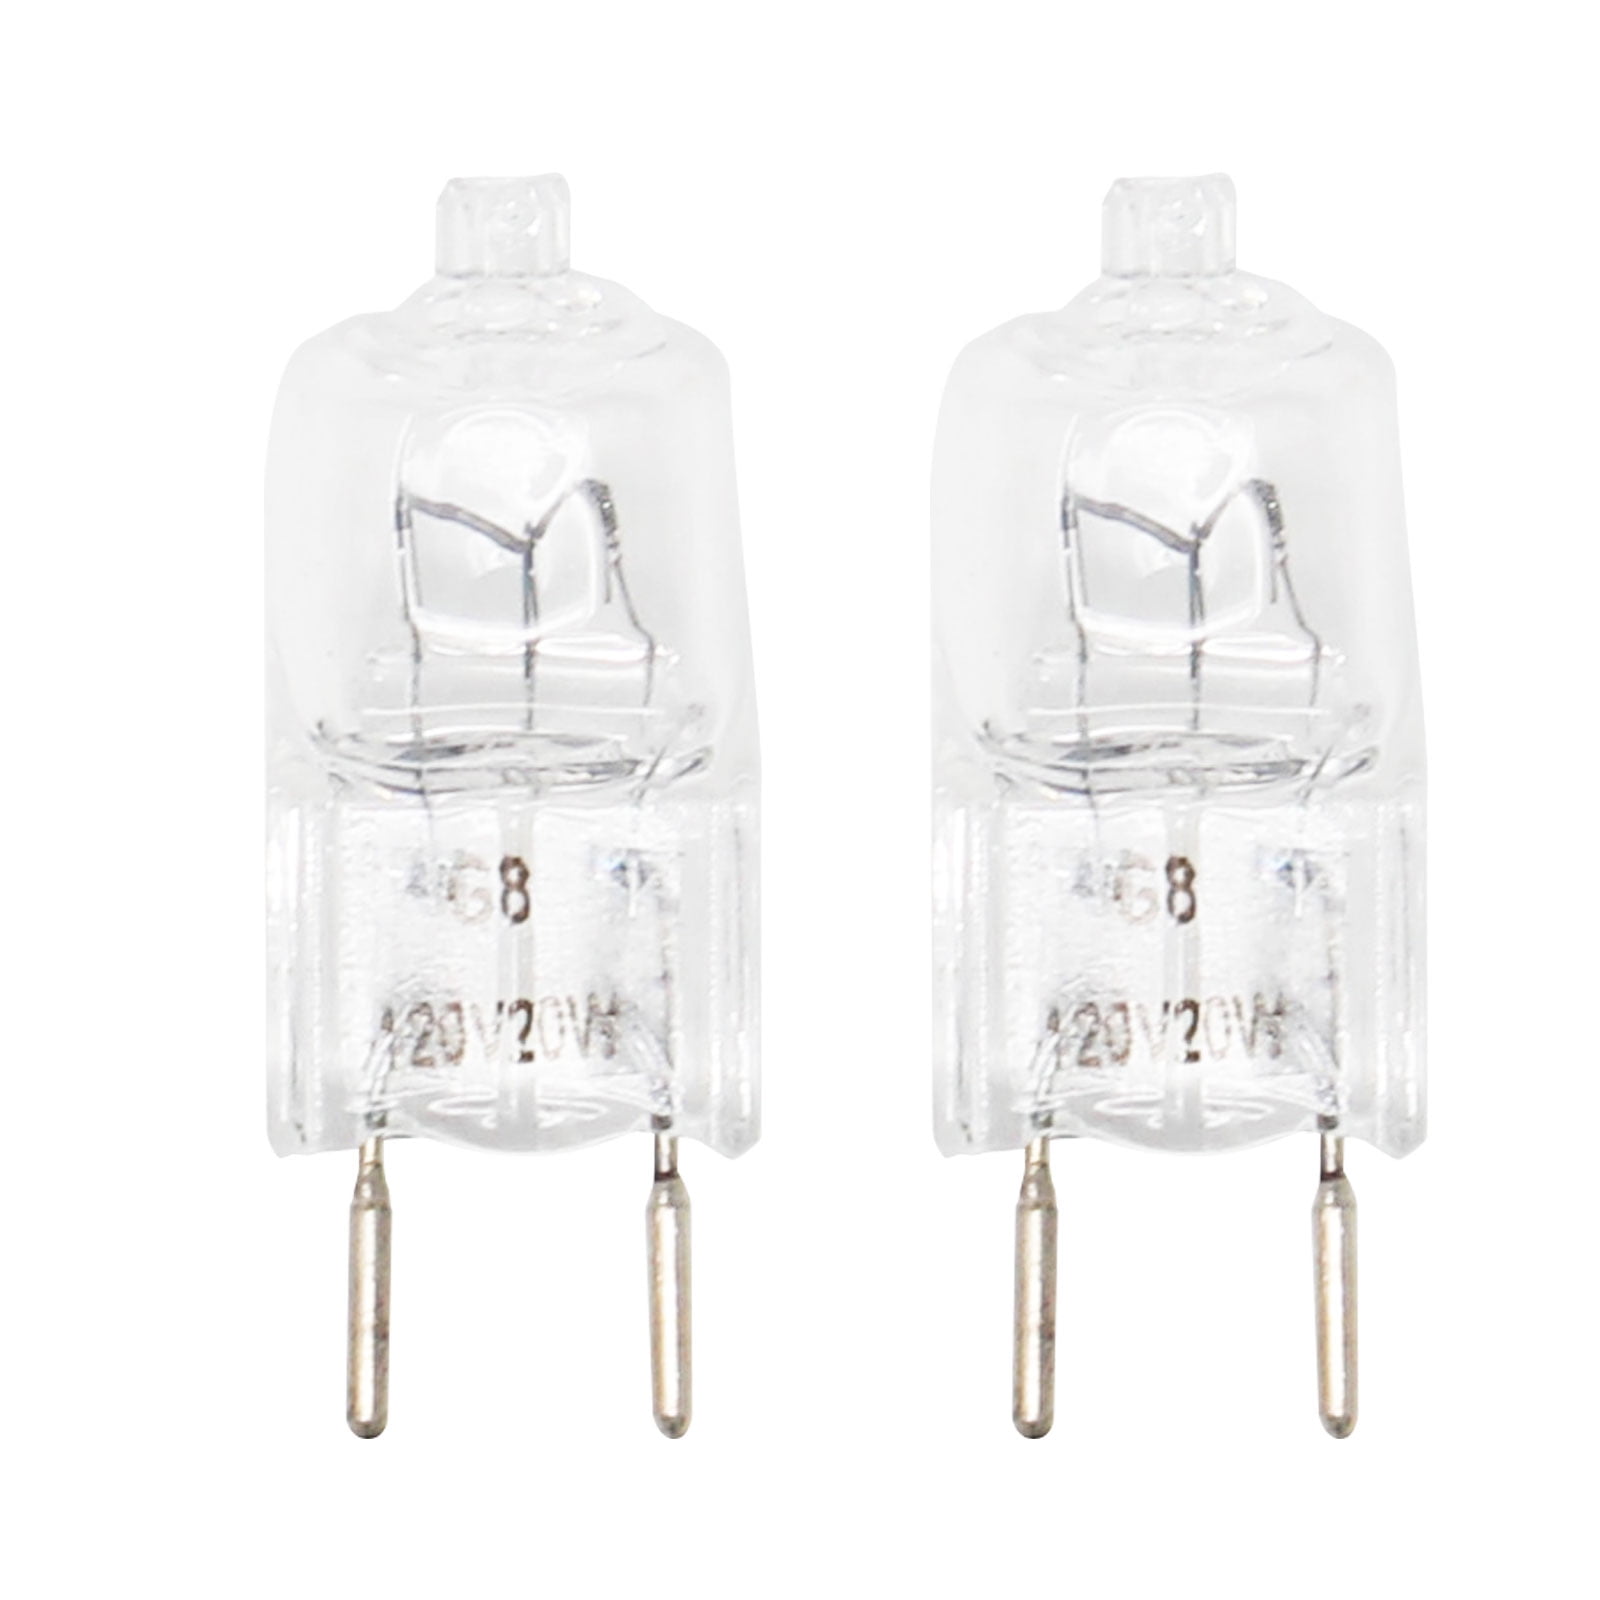 2pack WB25X10019 20W Halogen Lamp Bulb 20W replacement for GE Microwave 